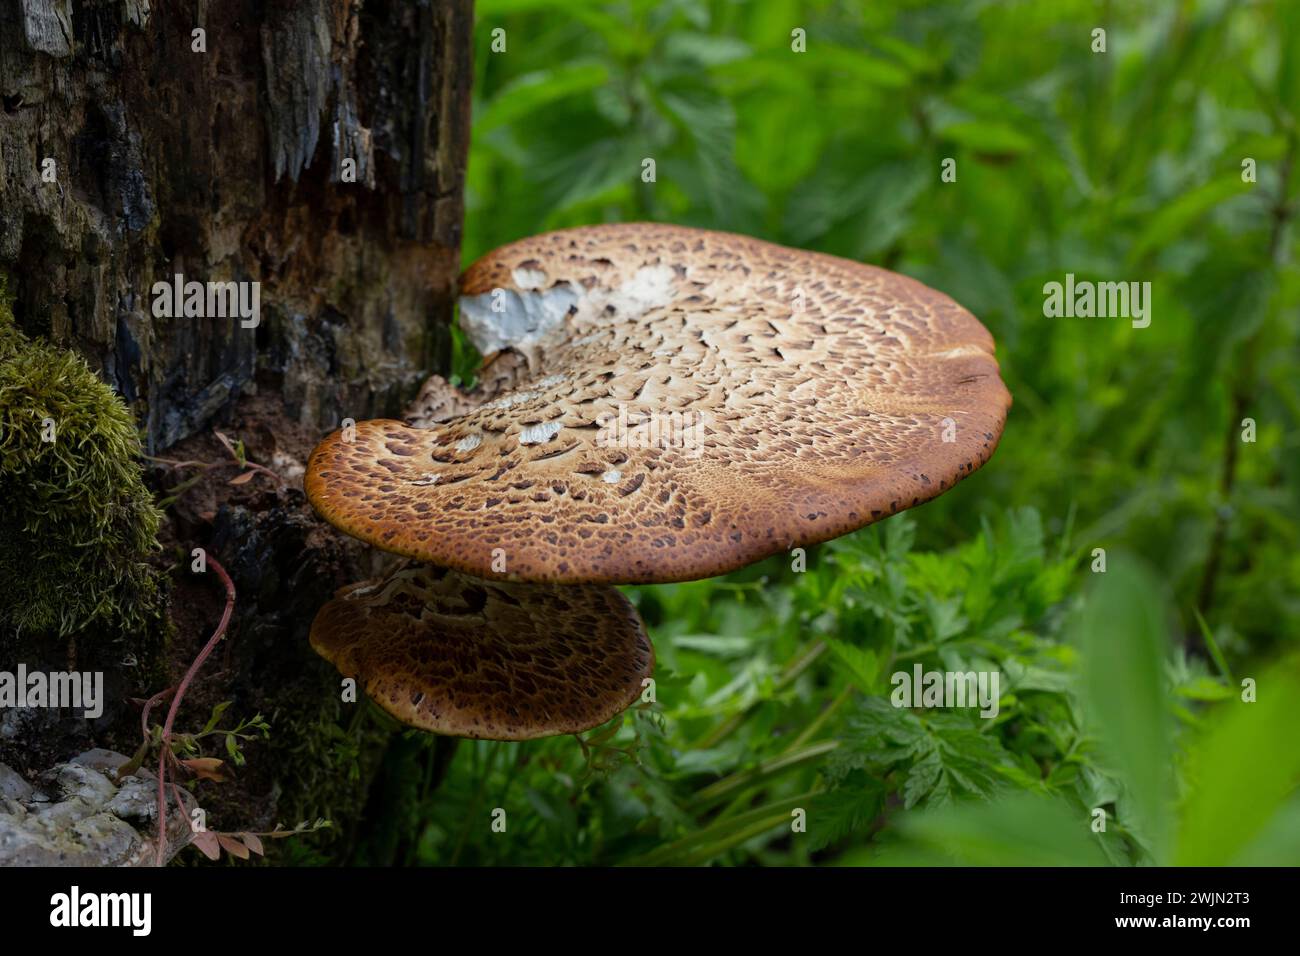 Cerioporus squamosus, also known as Pheasant's back mushrooms and dryad's saddle, is a basidiomycete bracket fungus found growing on dead trees Stock Photo